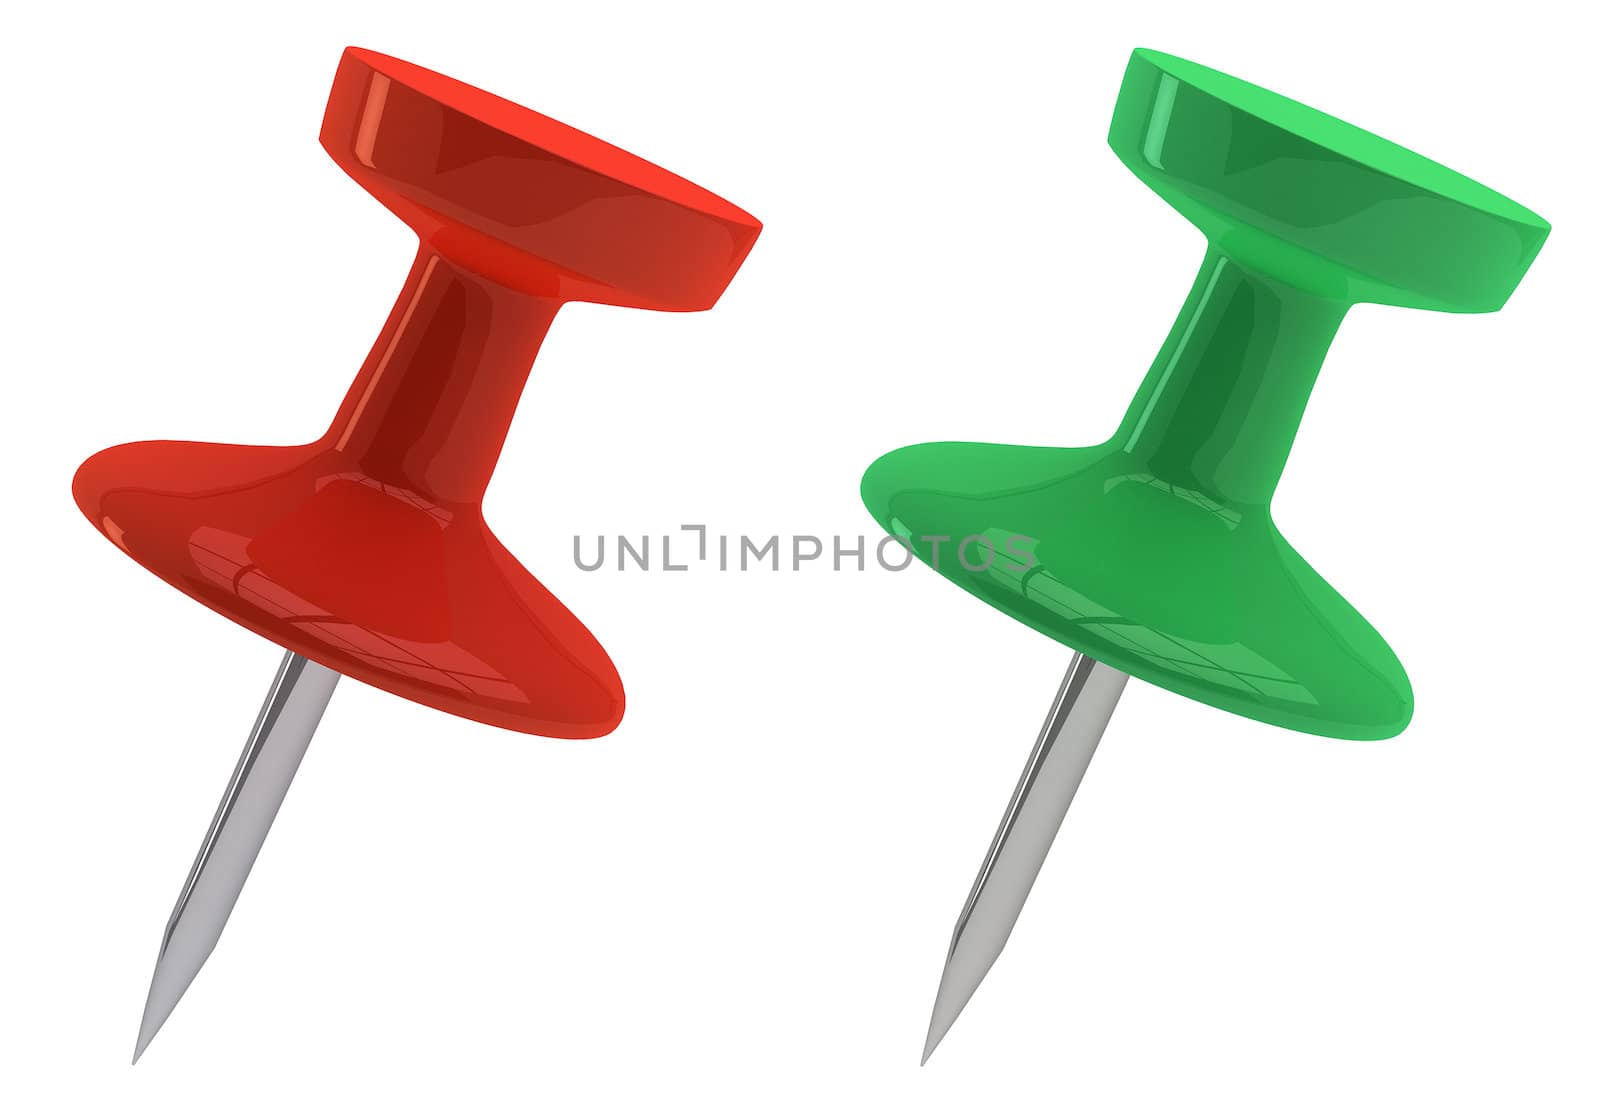 Glossy red and green pushpins isolated on white background. 3d illustration